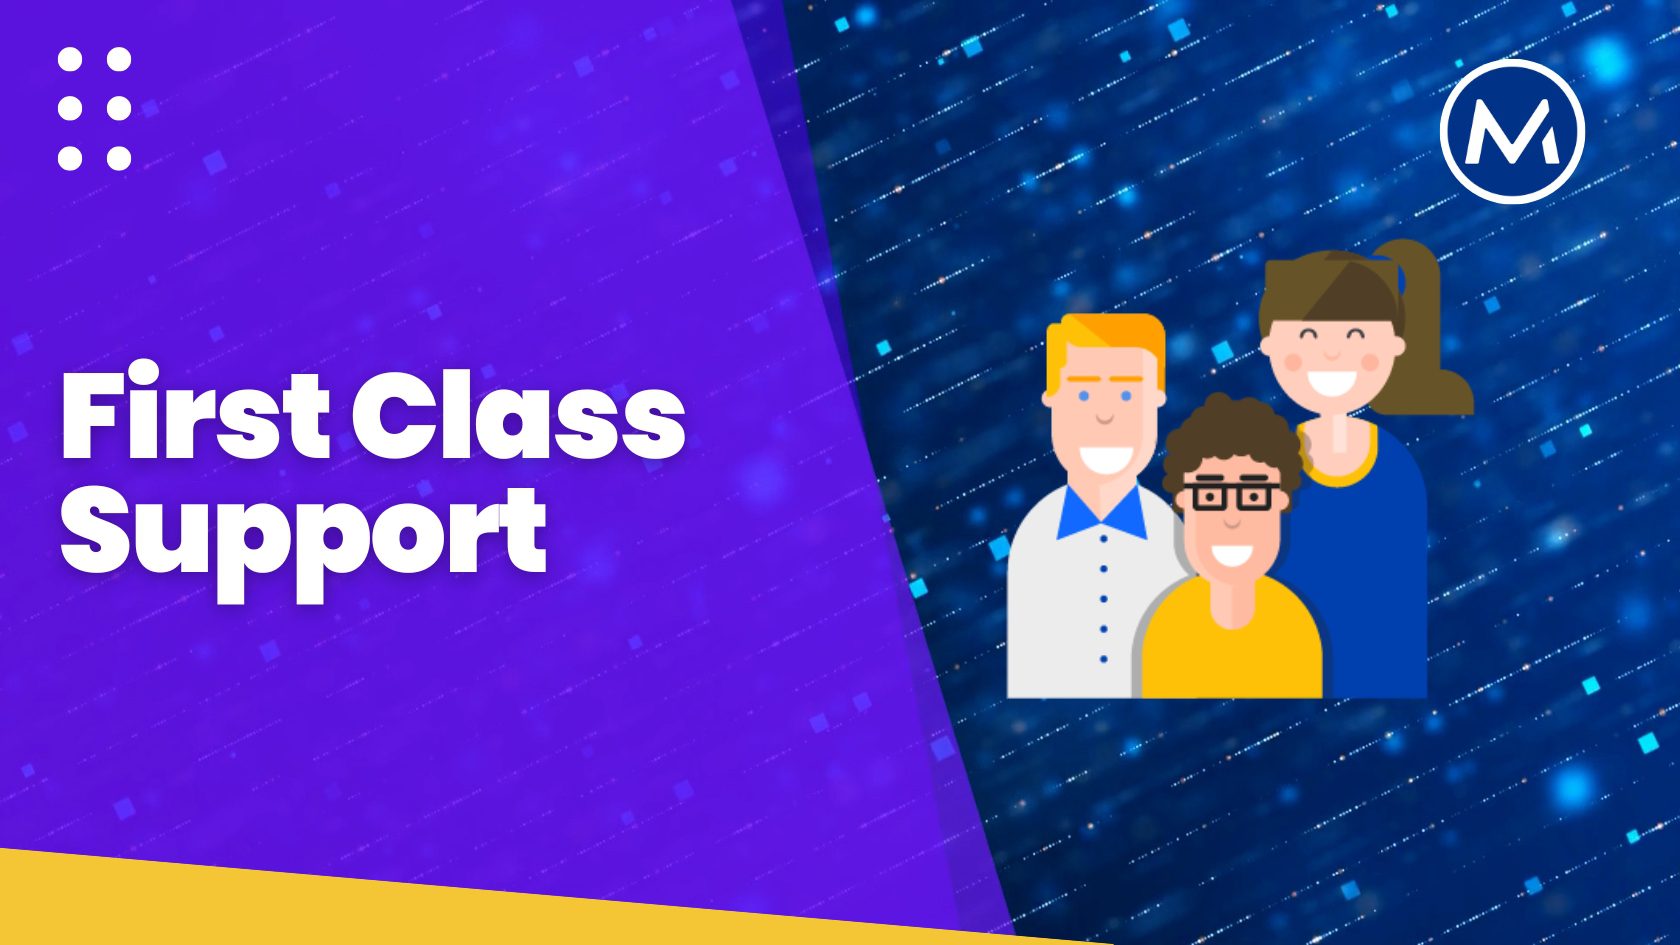 Care Plan Feature - First Class Support